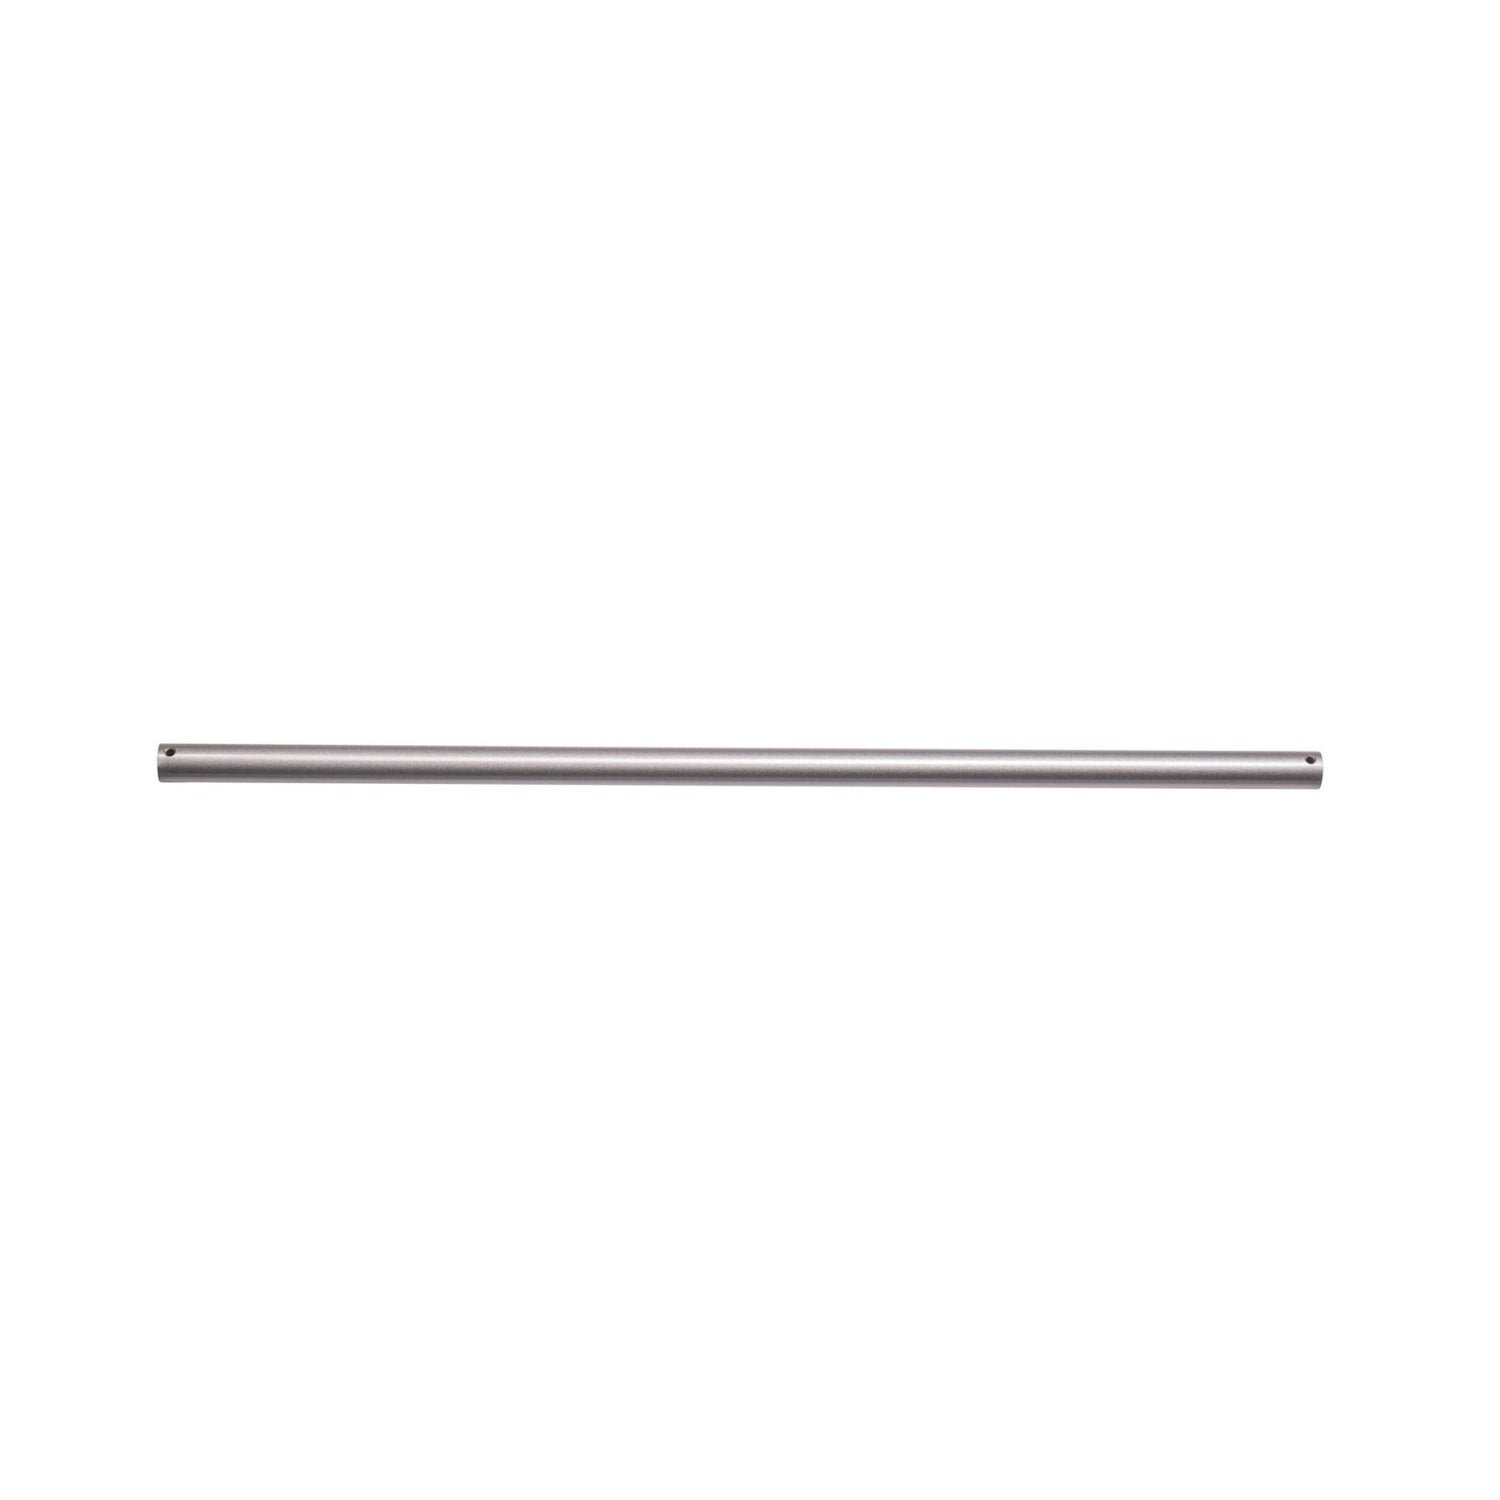 48 in XL Aluminum Extension Bar for the ED-300 Series Panic Exit Devices -  Pro-Edge HD